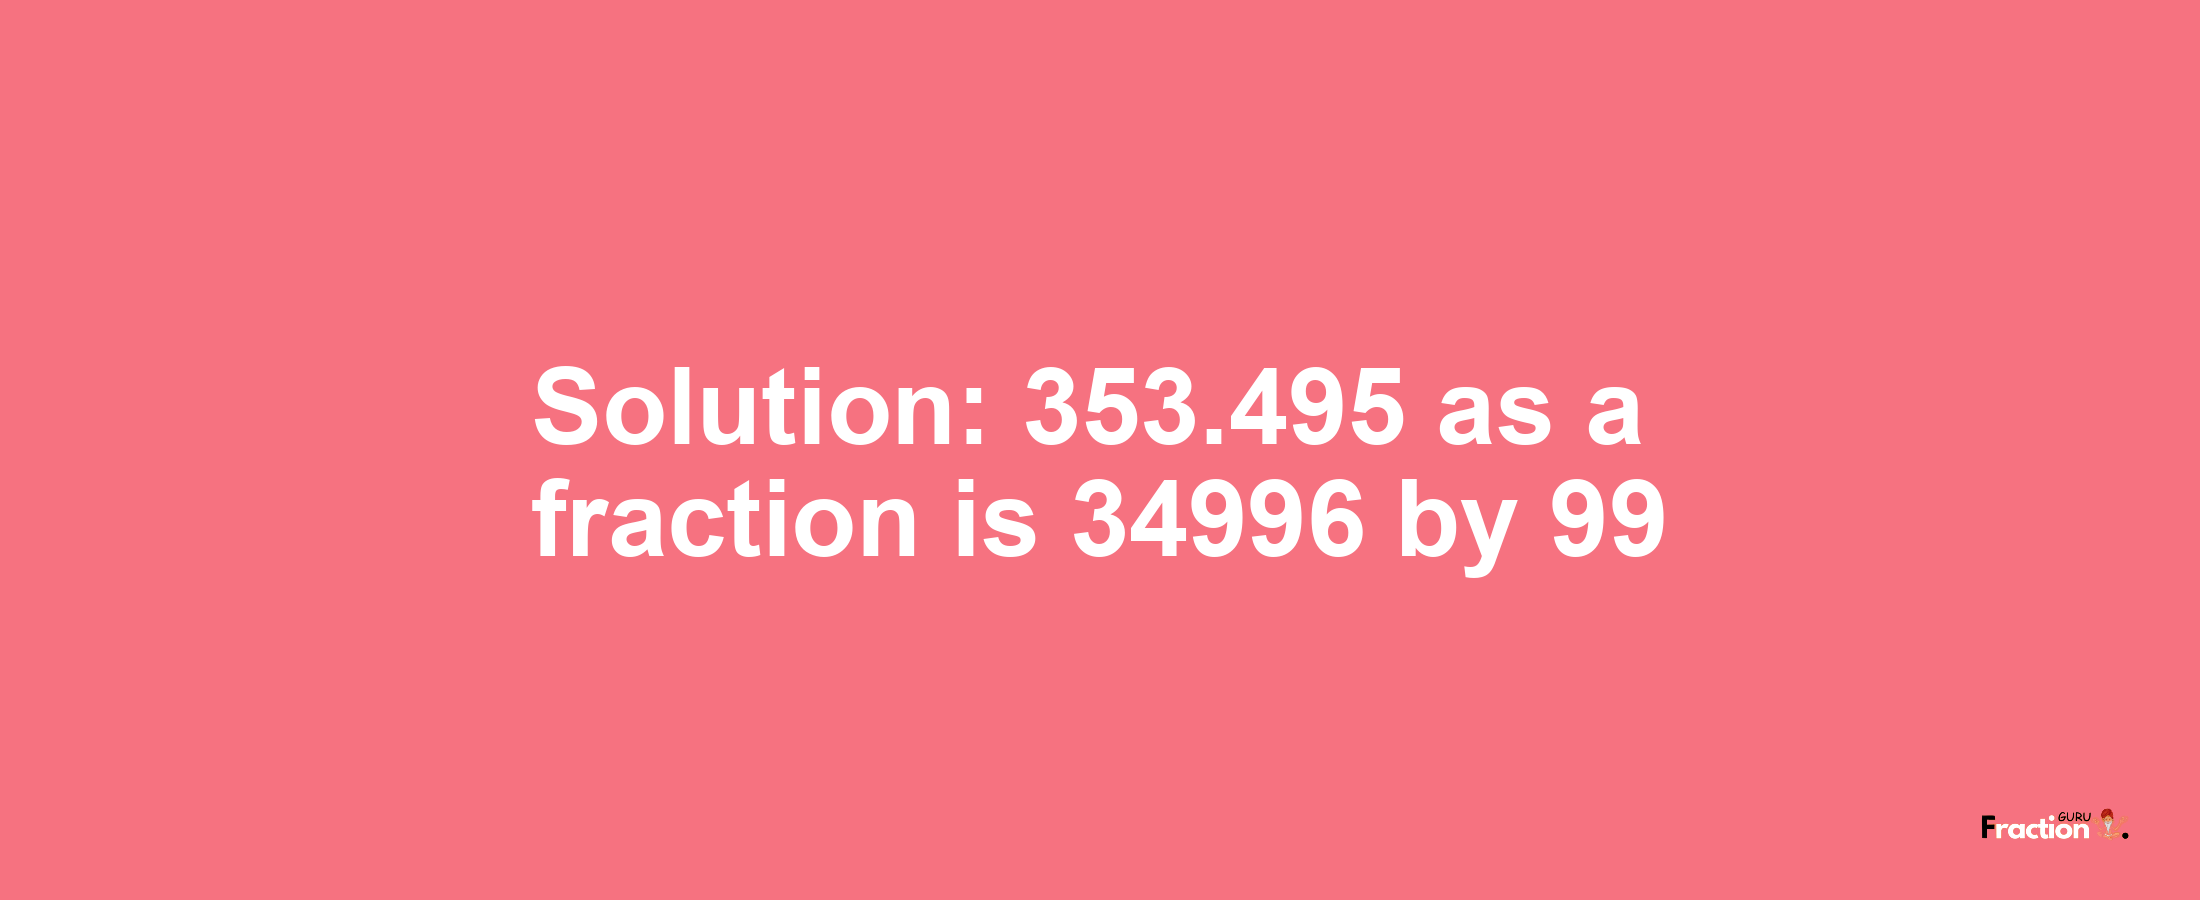 Solution:353.495 as a fraction is 34996/99